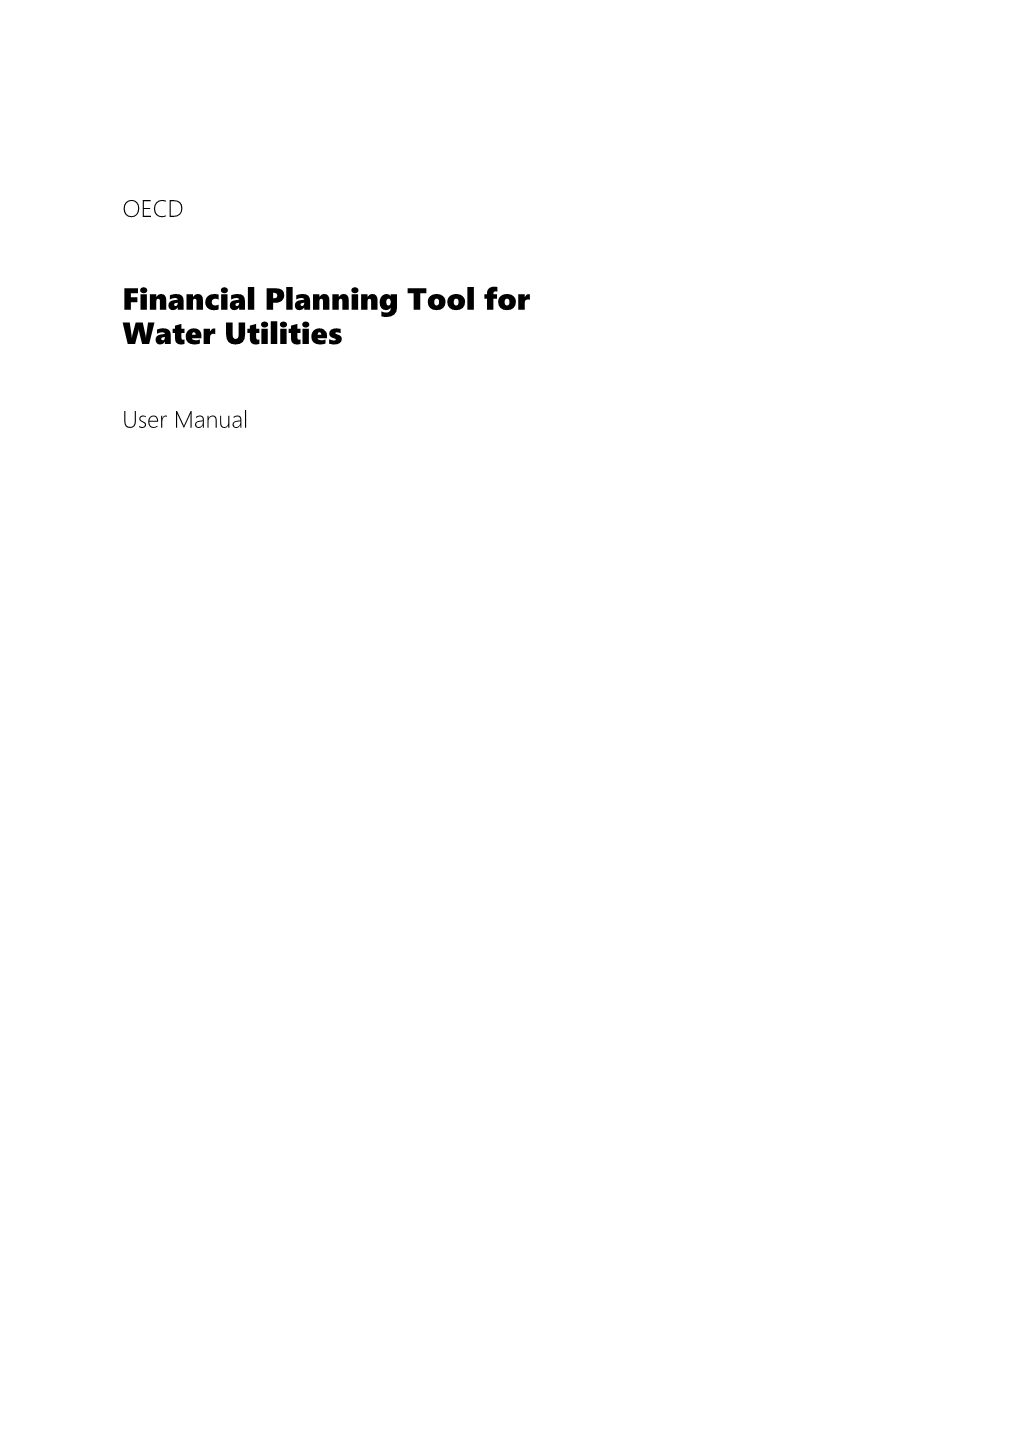 Financial Planning Tool for Water Utilities